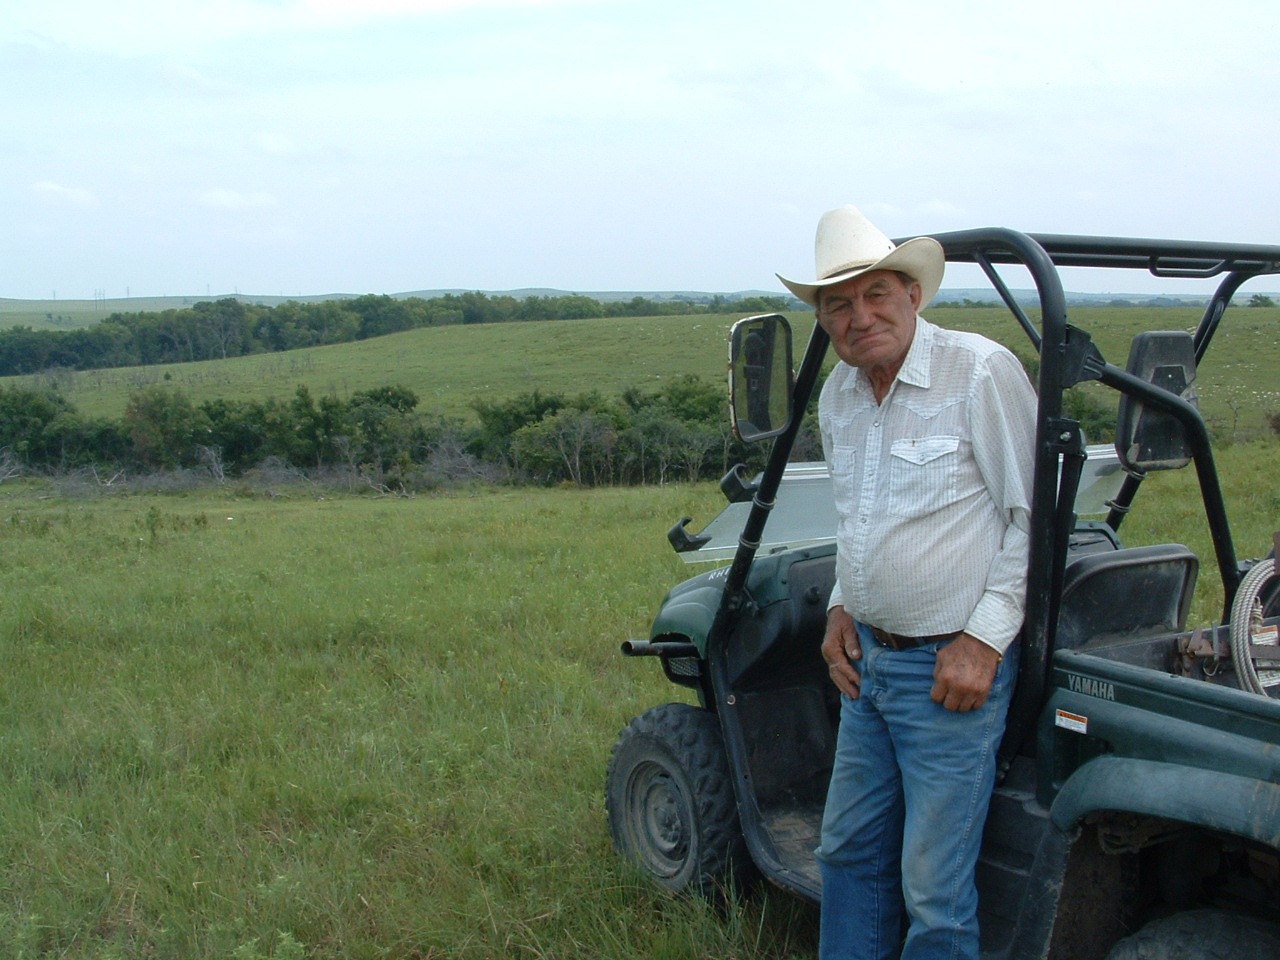 A four-wheeler had replaced horses for Alma rancher Gilbert Capoun, who passed away recently. “It’s easier to get on, doesn’t ever offer to buck me off, doesn’t eat or need a drink when I’m not using it, and works fine for gathering and checking cattle,” evaluated Capoun, who took pride in the pasture renovation on his Wabaunsee County CX Ranch.